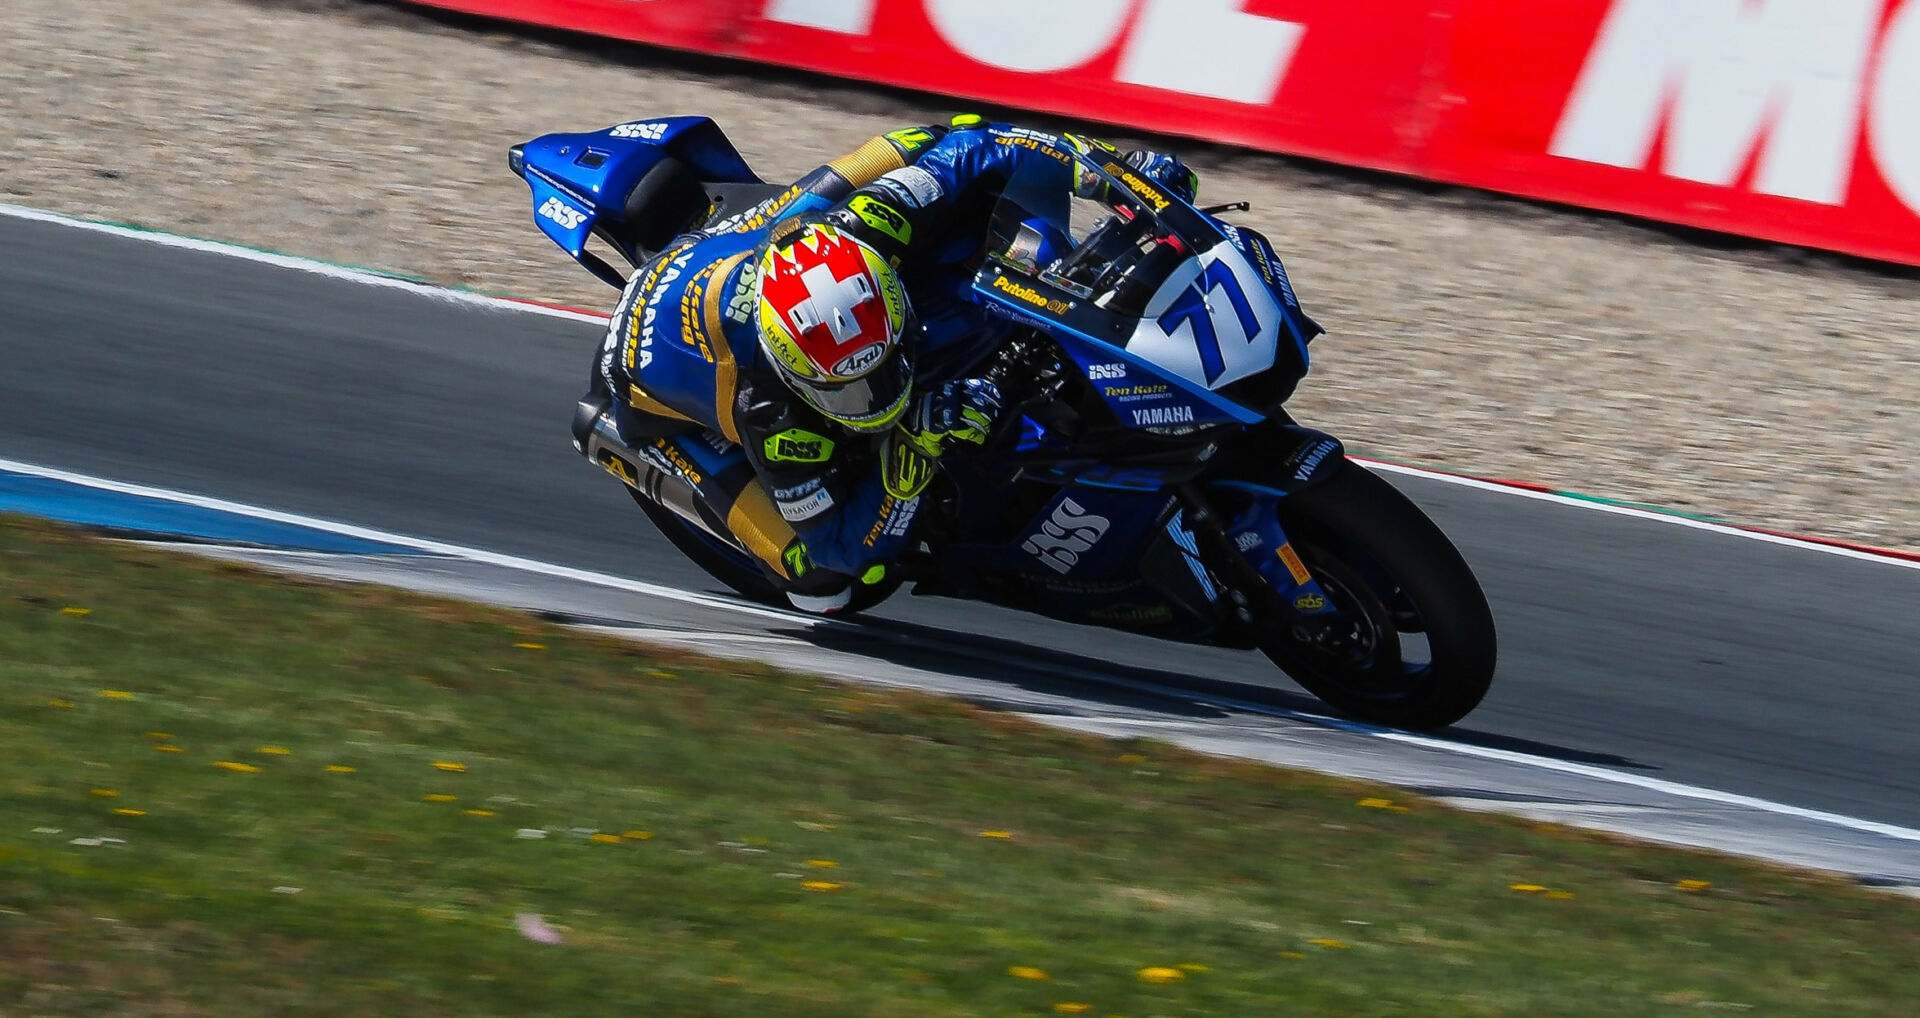 Dominique Aegerter (77), the defending Supersport World Champion and current point leader. Photo courtesy Dorna.